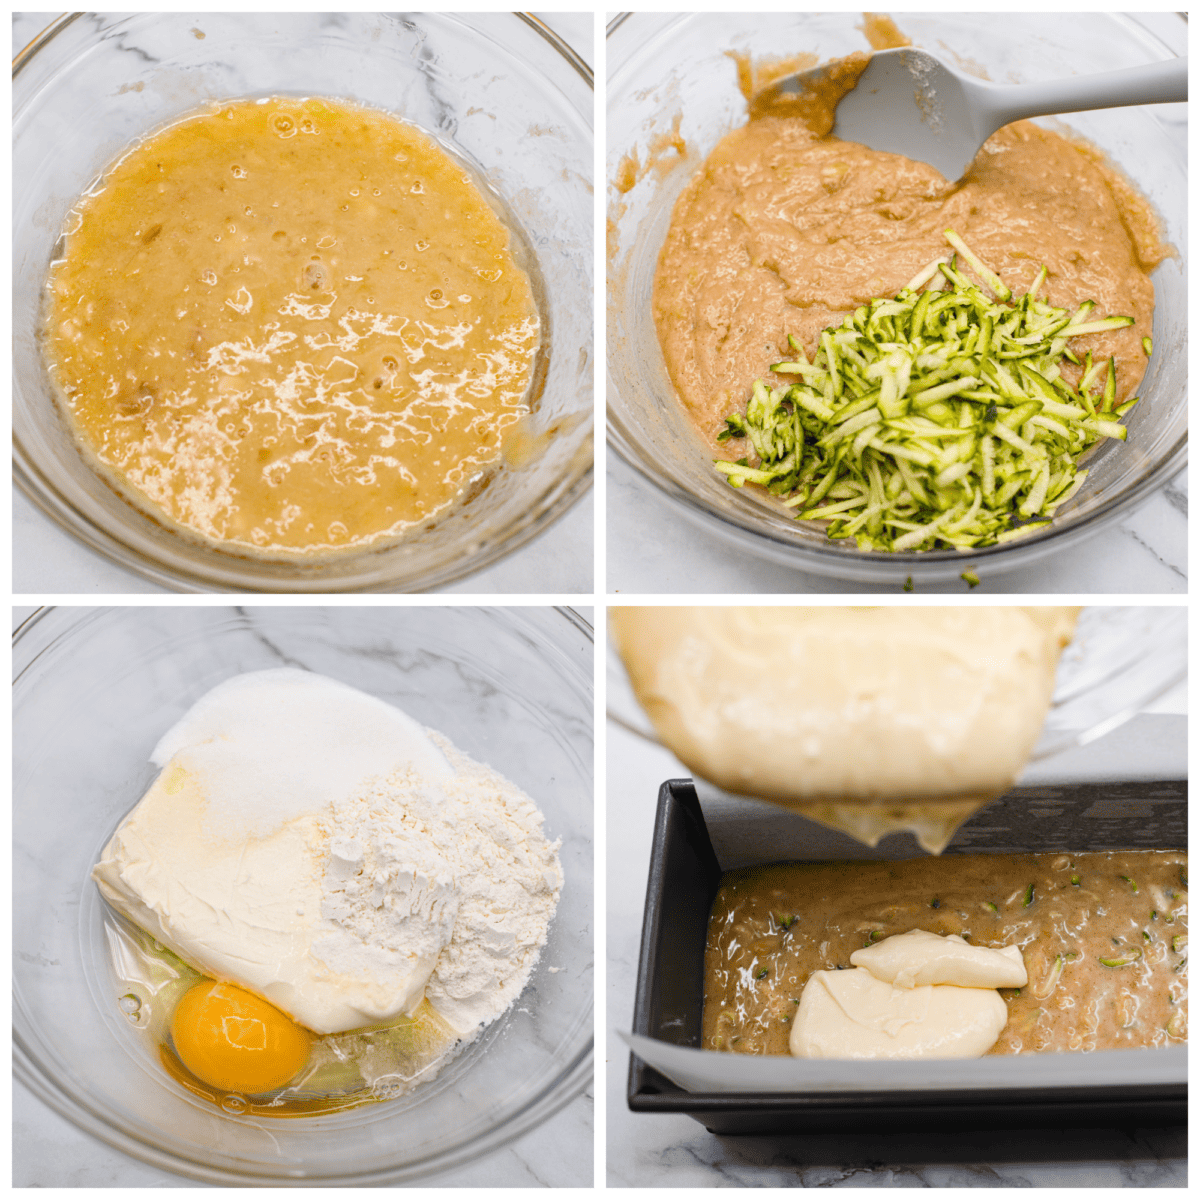 4-photo collage of the batter and filling being prepared.